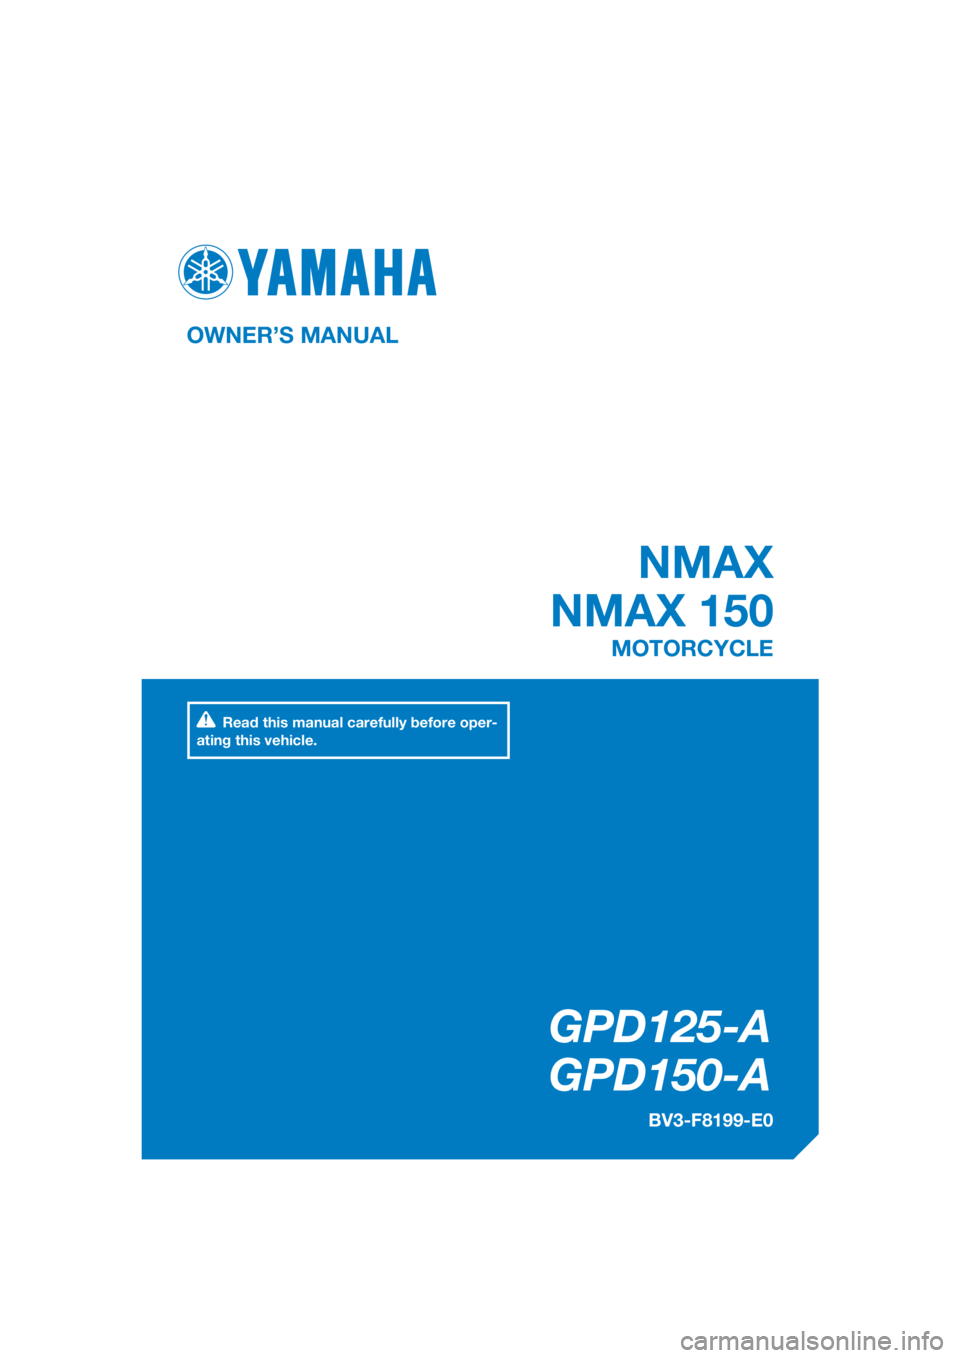 YAMAHA NMAX 150 2017  Owners Manual DIC183
GPD125-A
   GPD150-A
OWNER’S MANUAL
BV3-F8199-E0
MOTORCYCLE
[English  (E)]
Read this manual carefully before oper-
ating this vehicle.
 NMAX
NMAX 150 